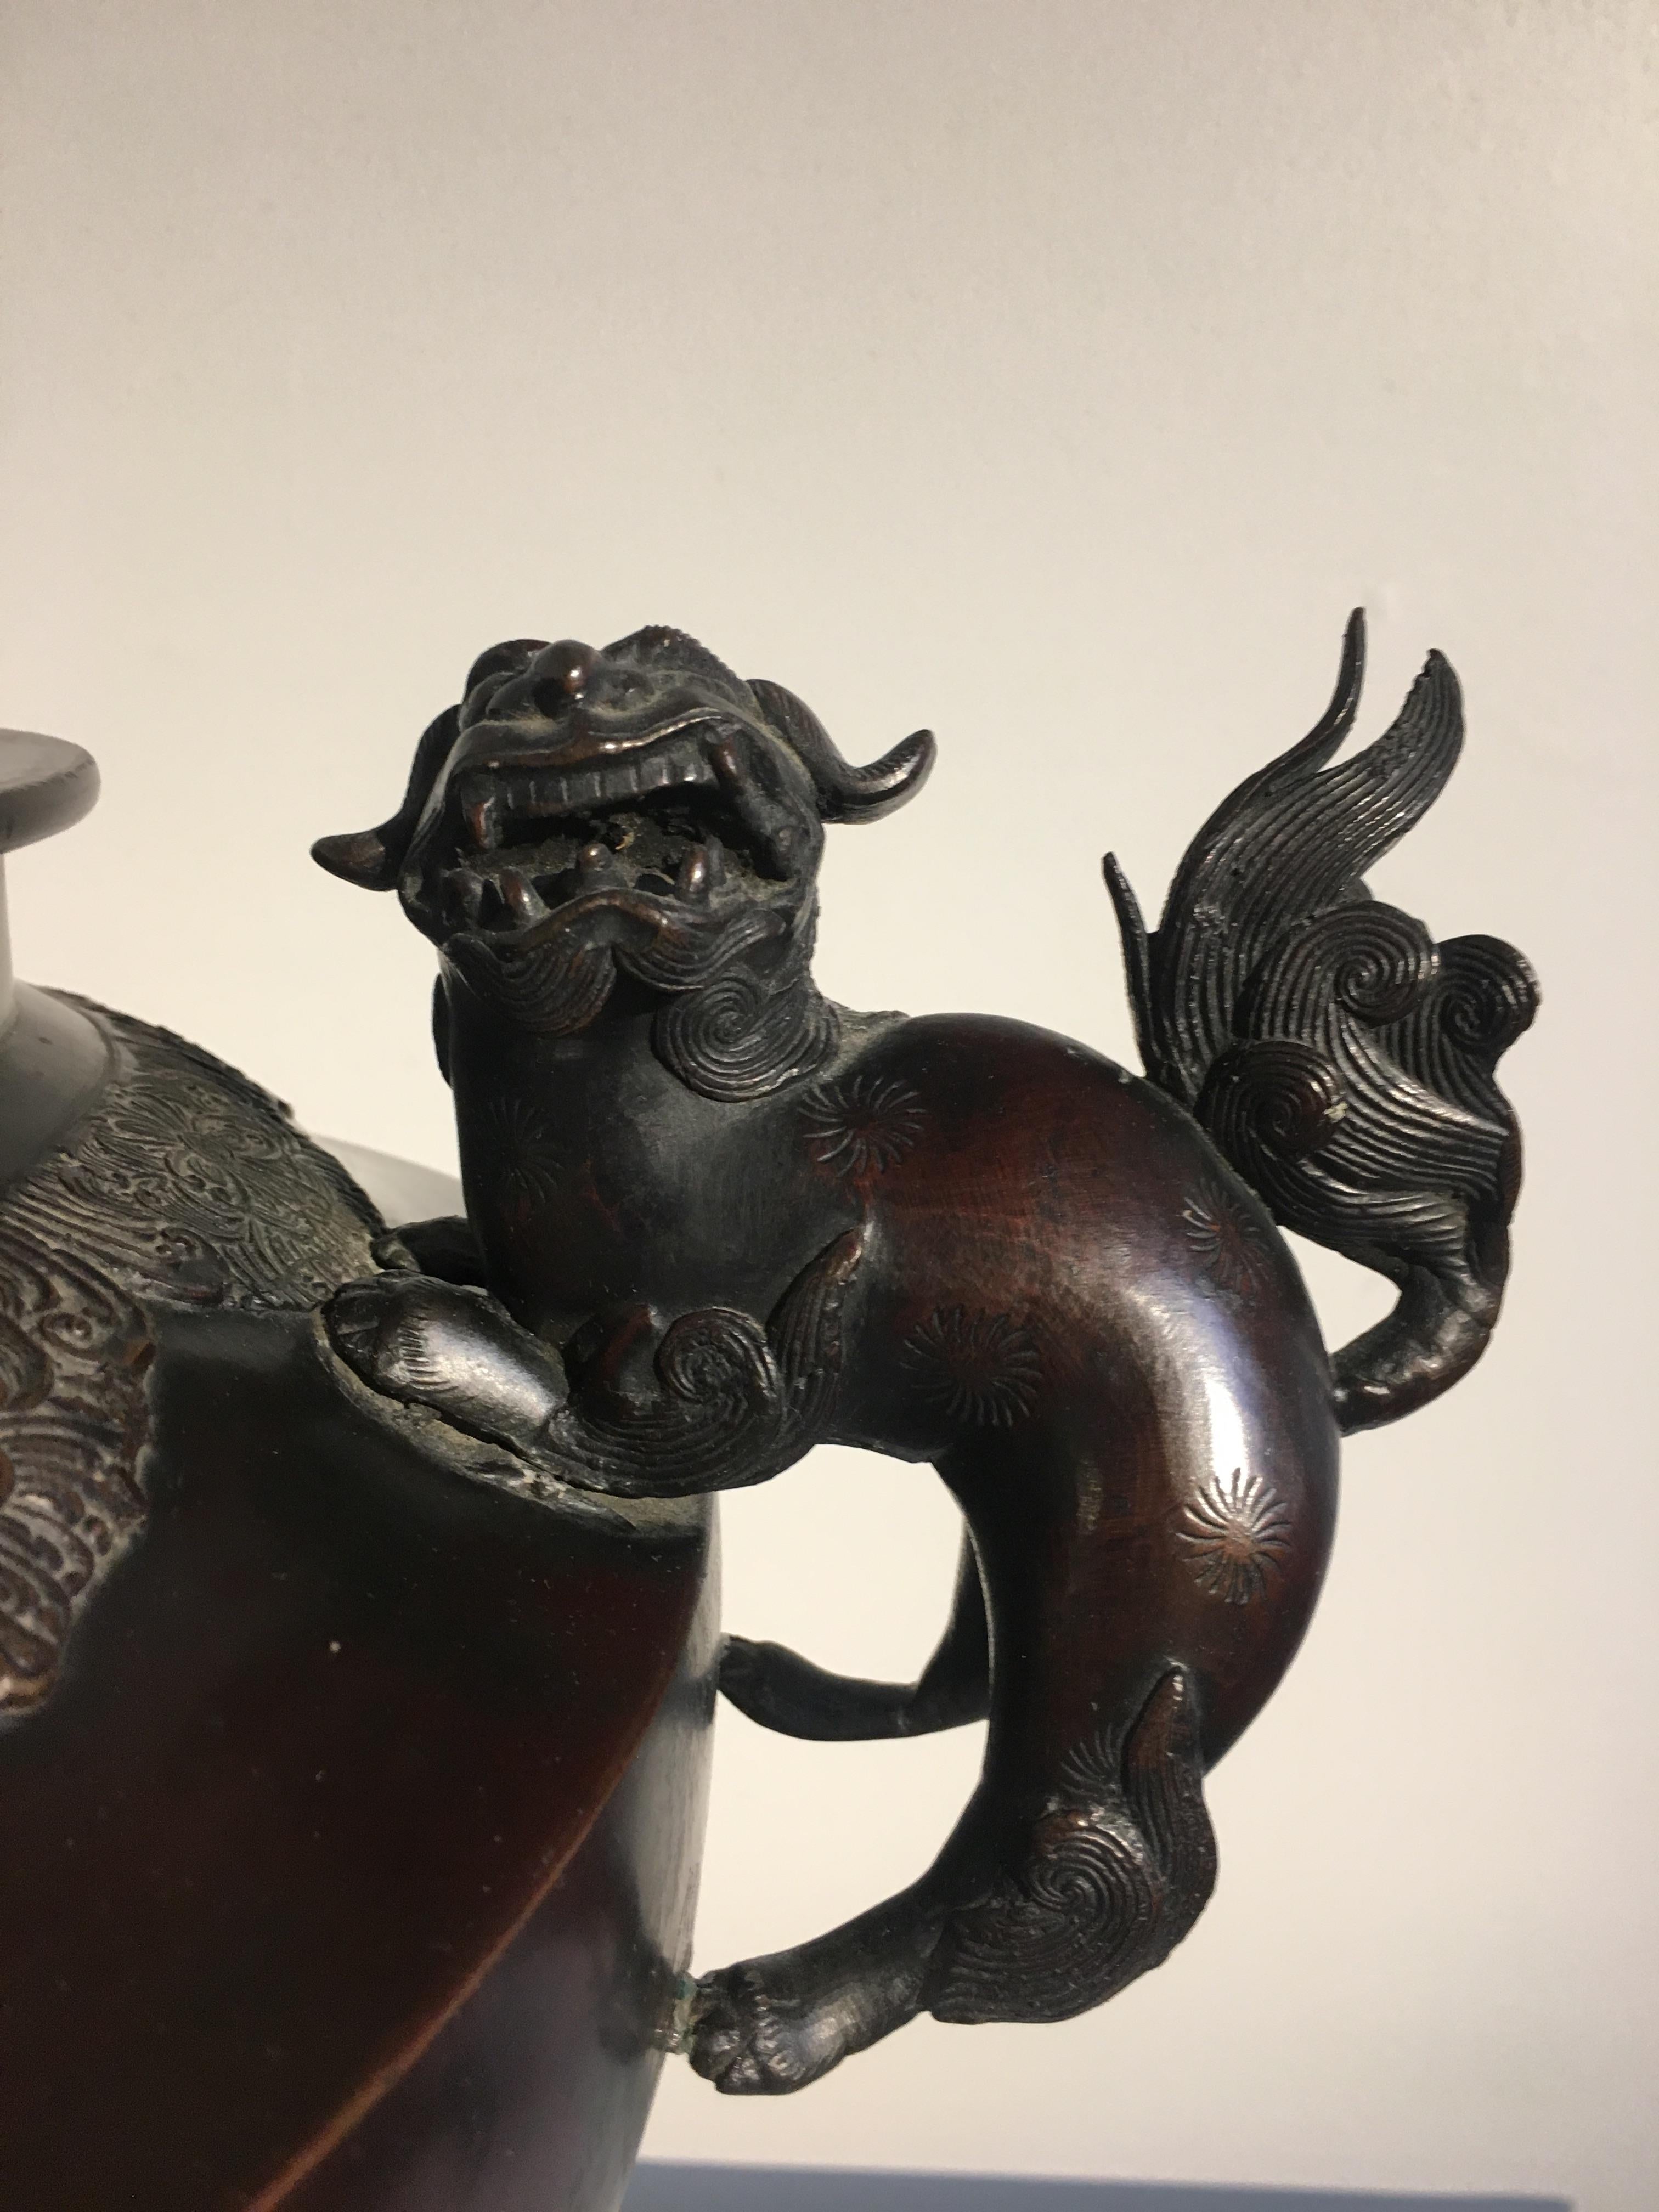 Early 20th Century Large Japanese Meiji Period Cast Bronze Censer with Dragon and Shishi